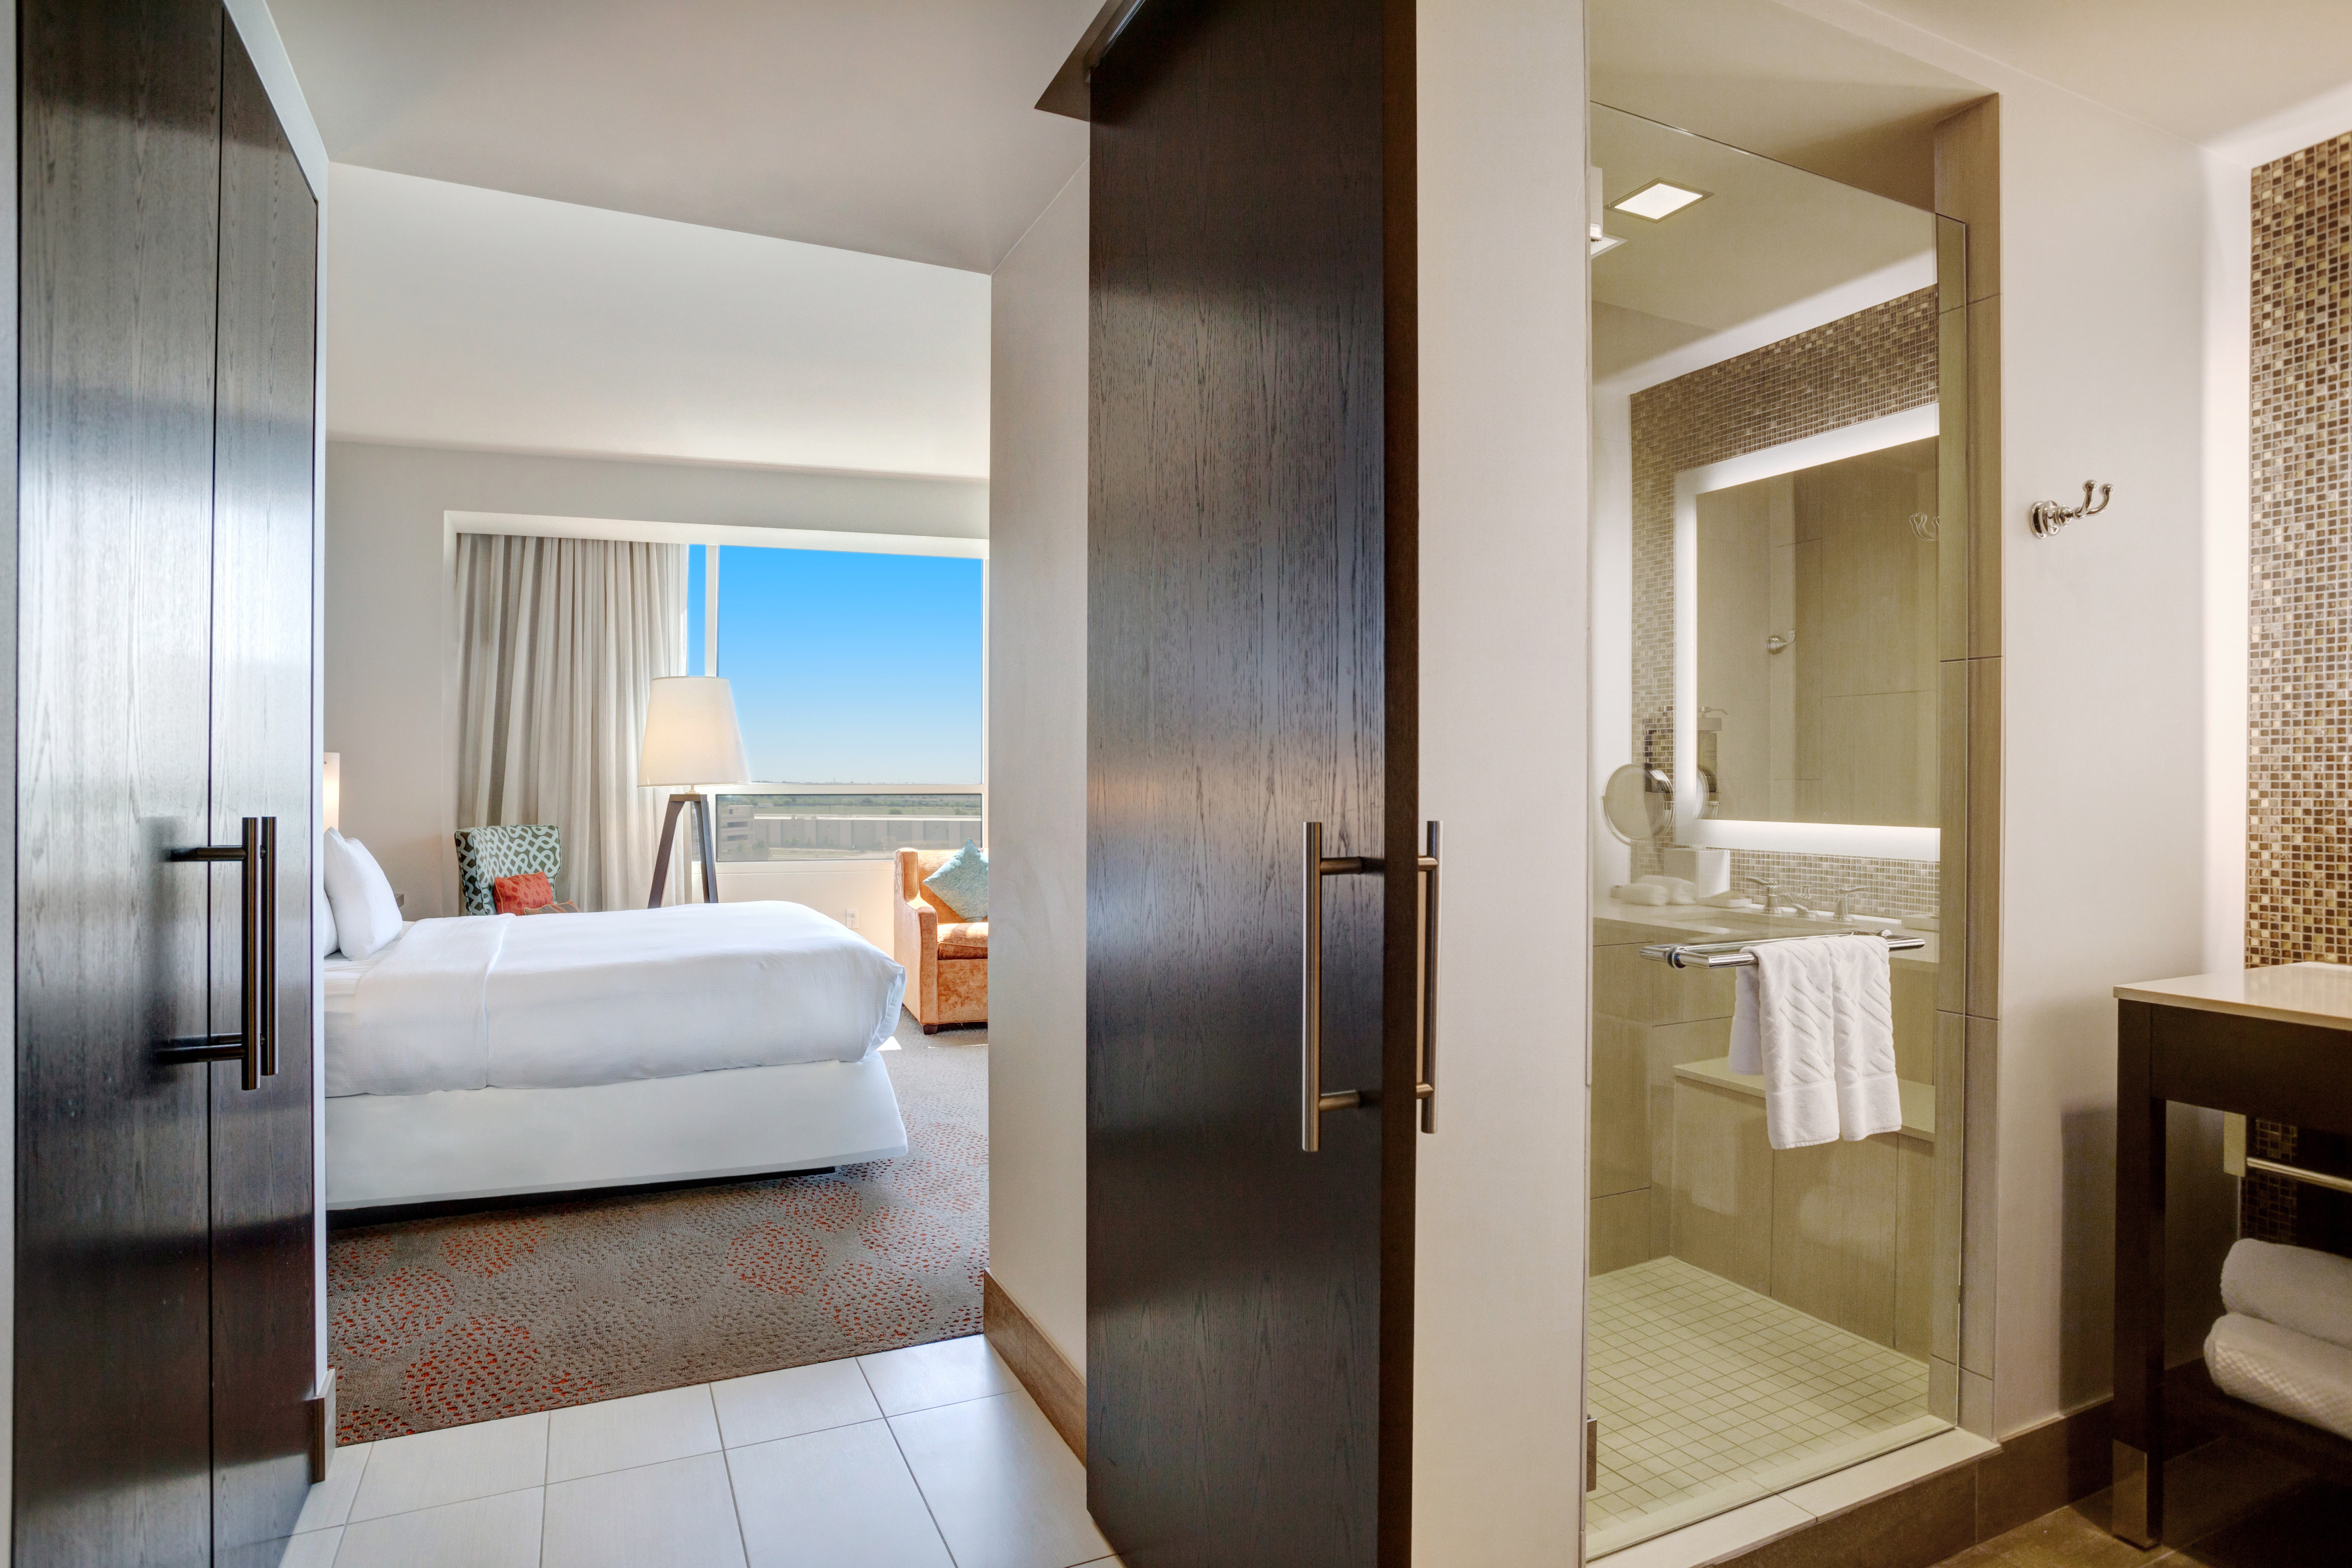 king bedroom with view of bathroom shower